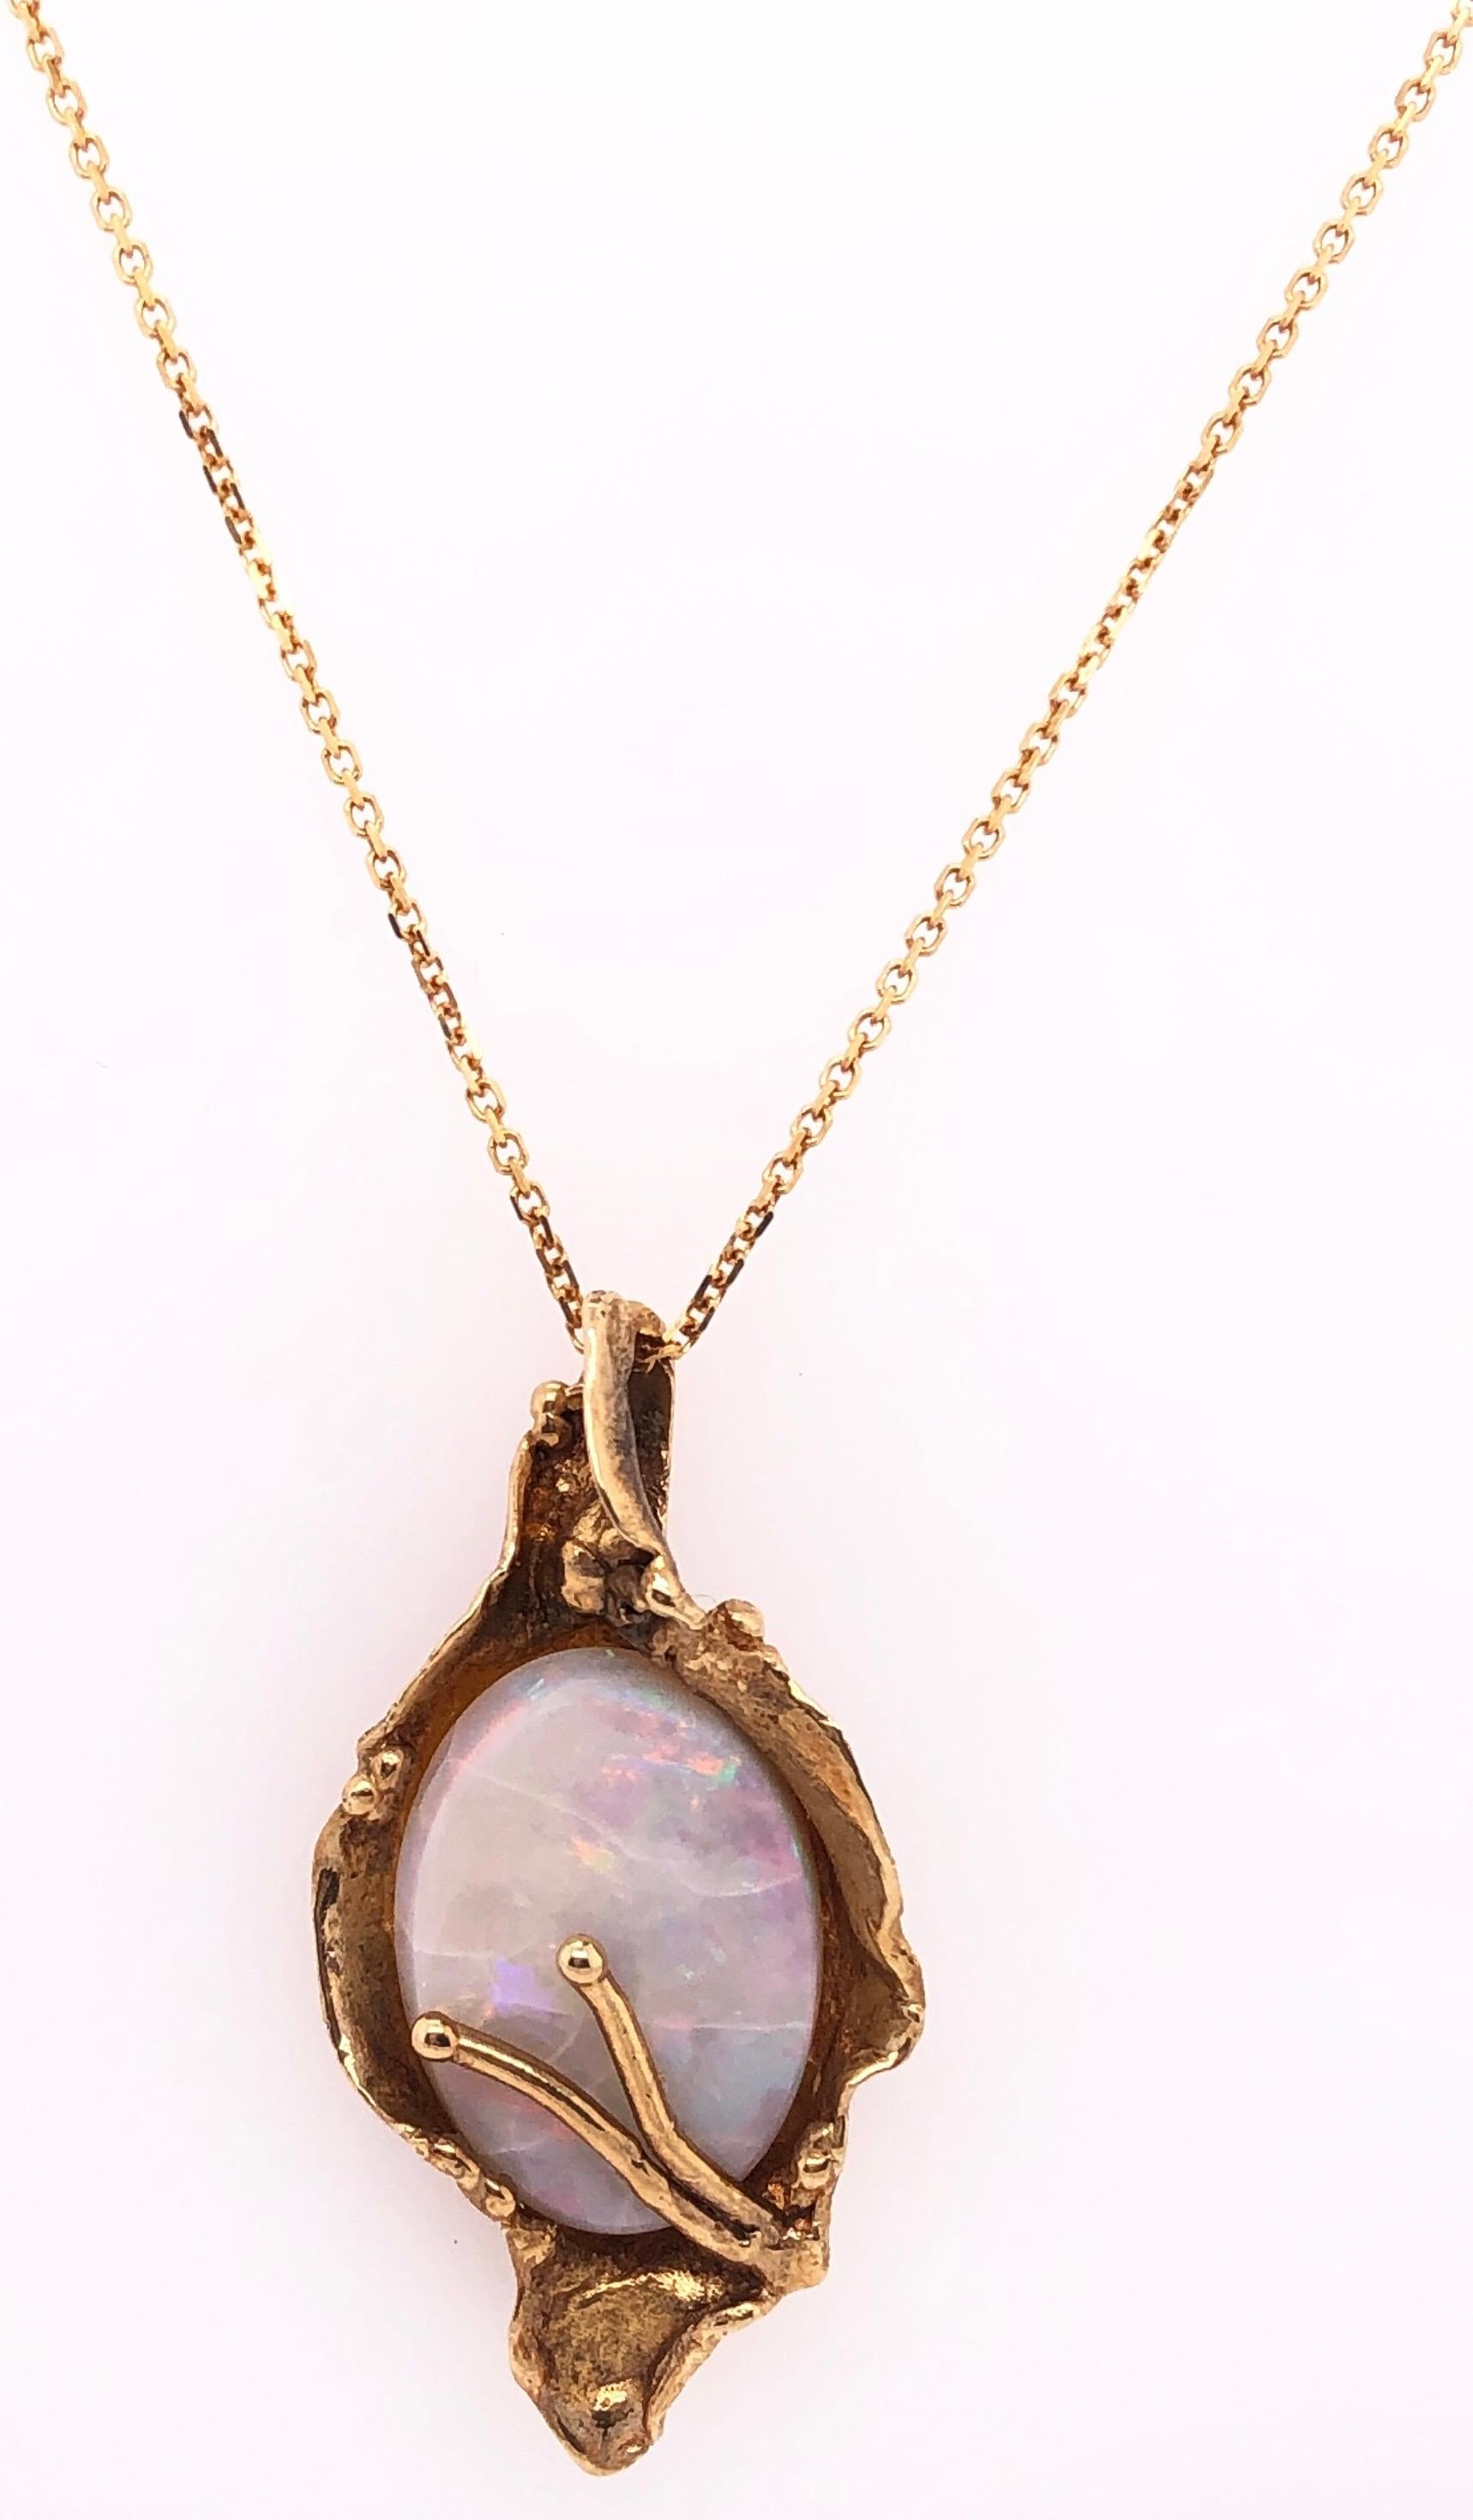 Contemporary 14 Karat Yellow Gold Necklace with Freeform Oval Opal and Gold Pendant For Sale